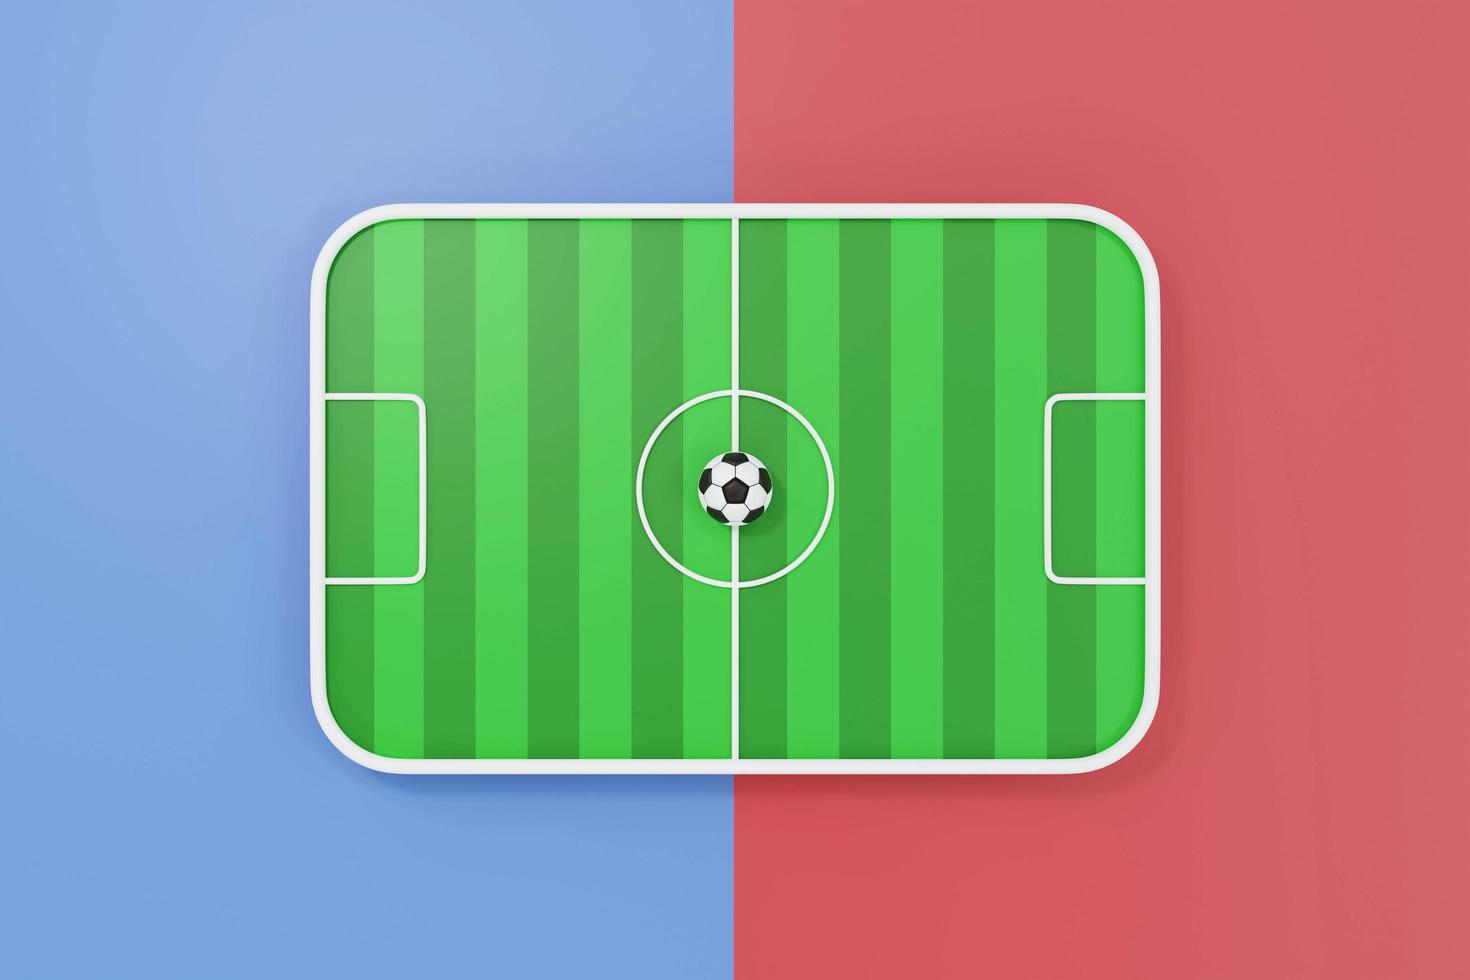 Minimal football soccer filed for competition 3D render illustration photo